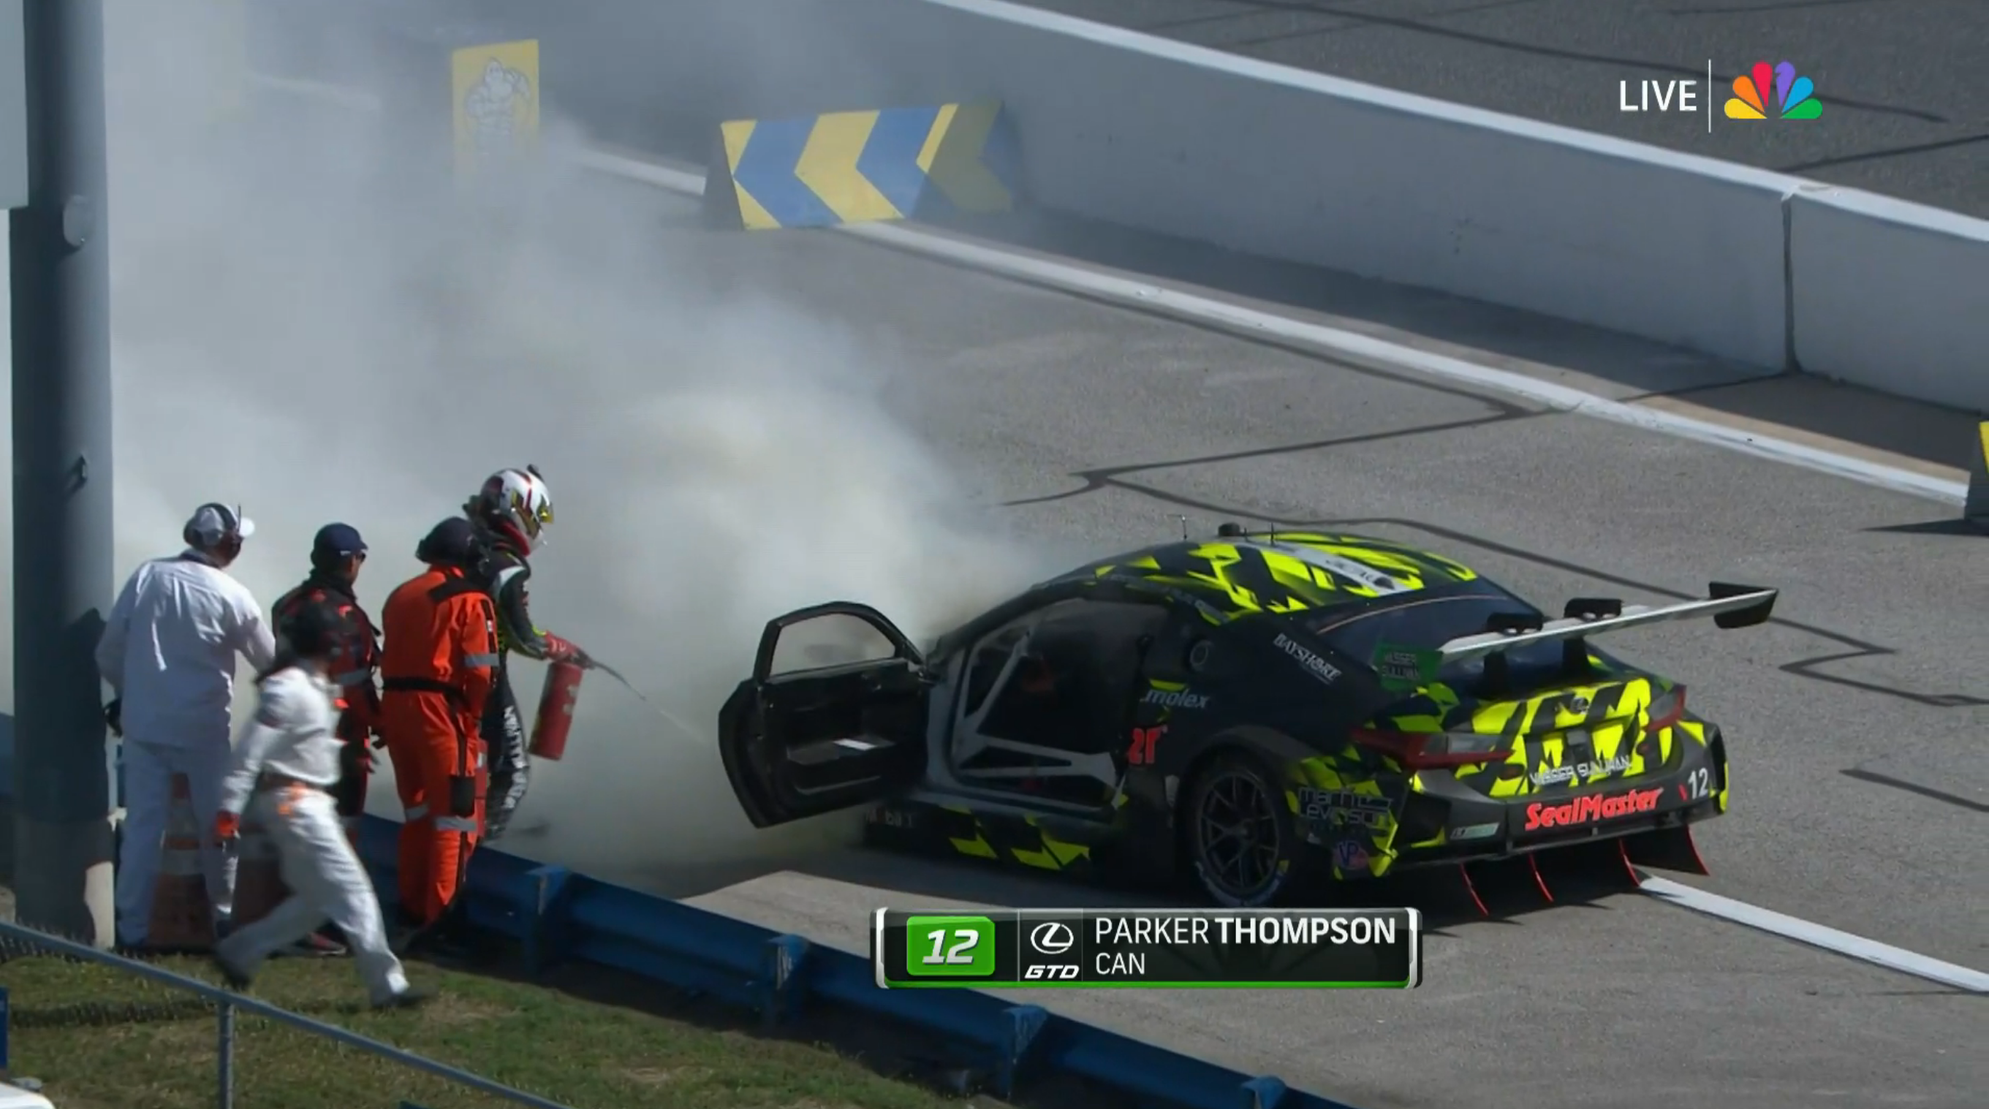 A driver futilely tries to extinguish a fire billowing from the hood of a Lexus race car.